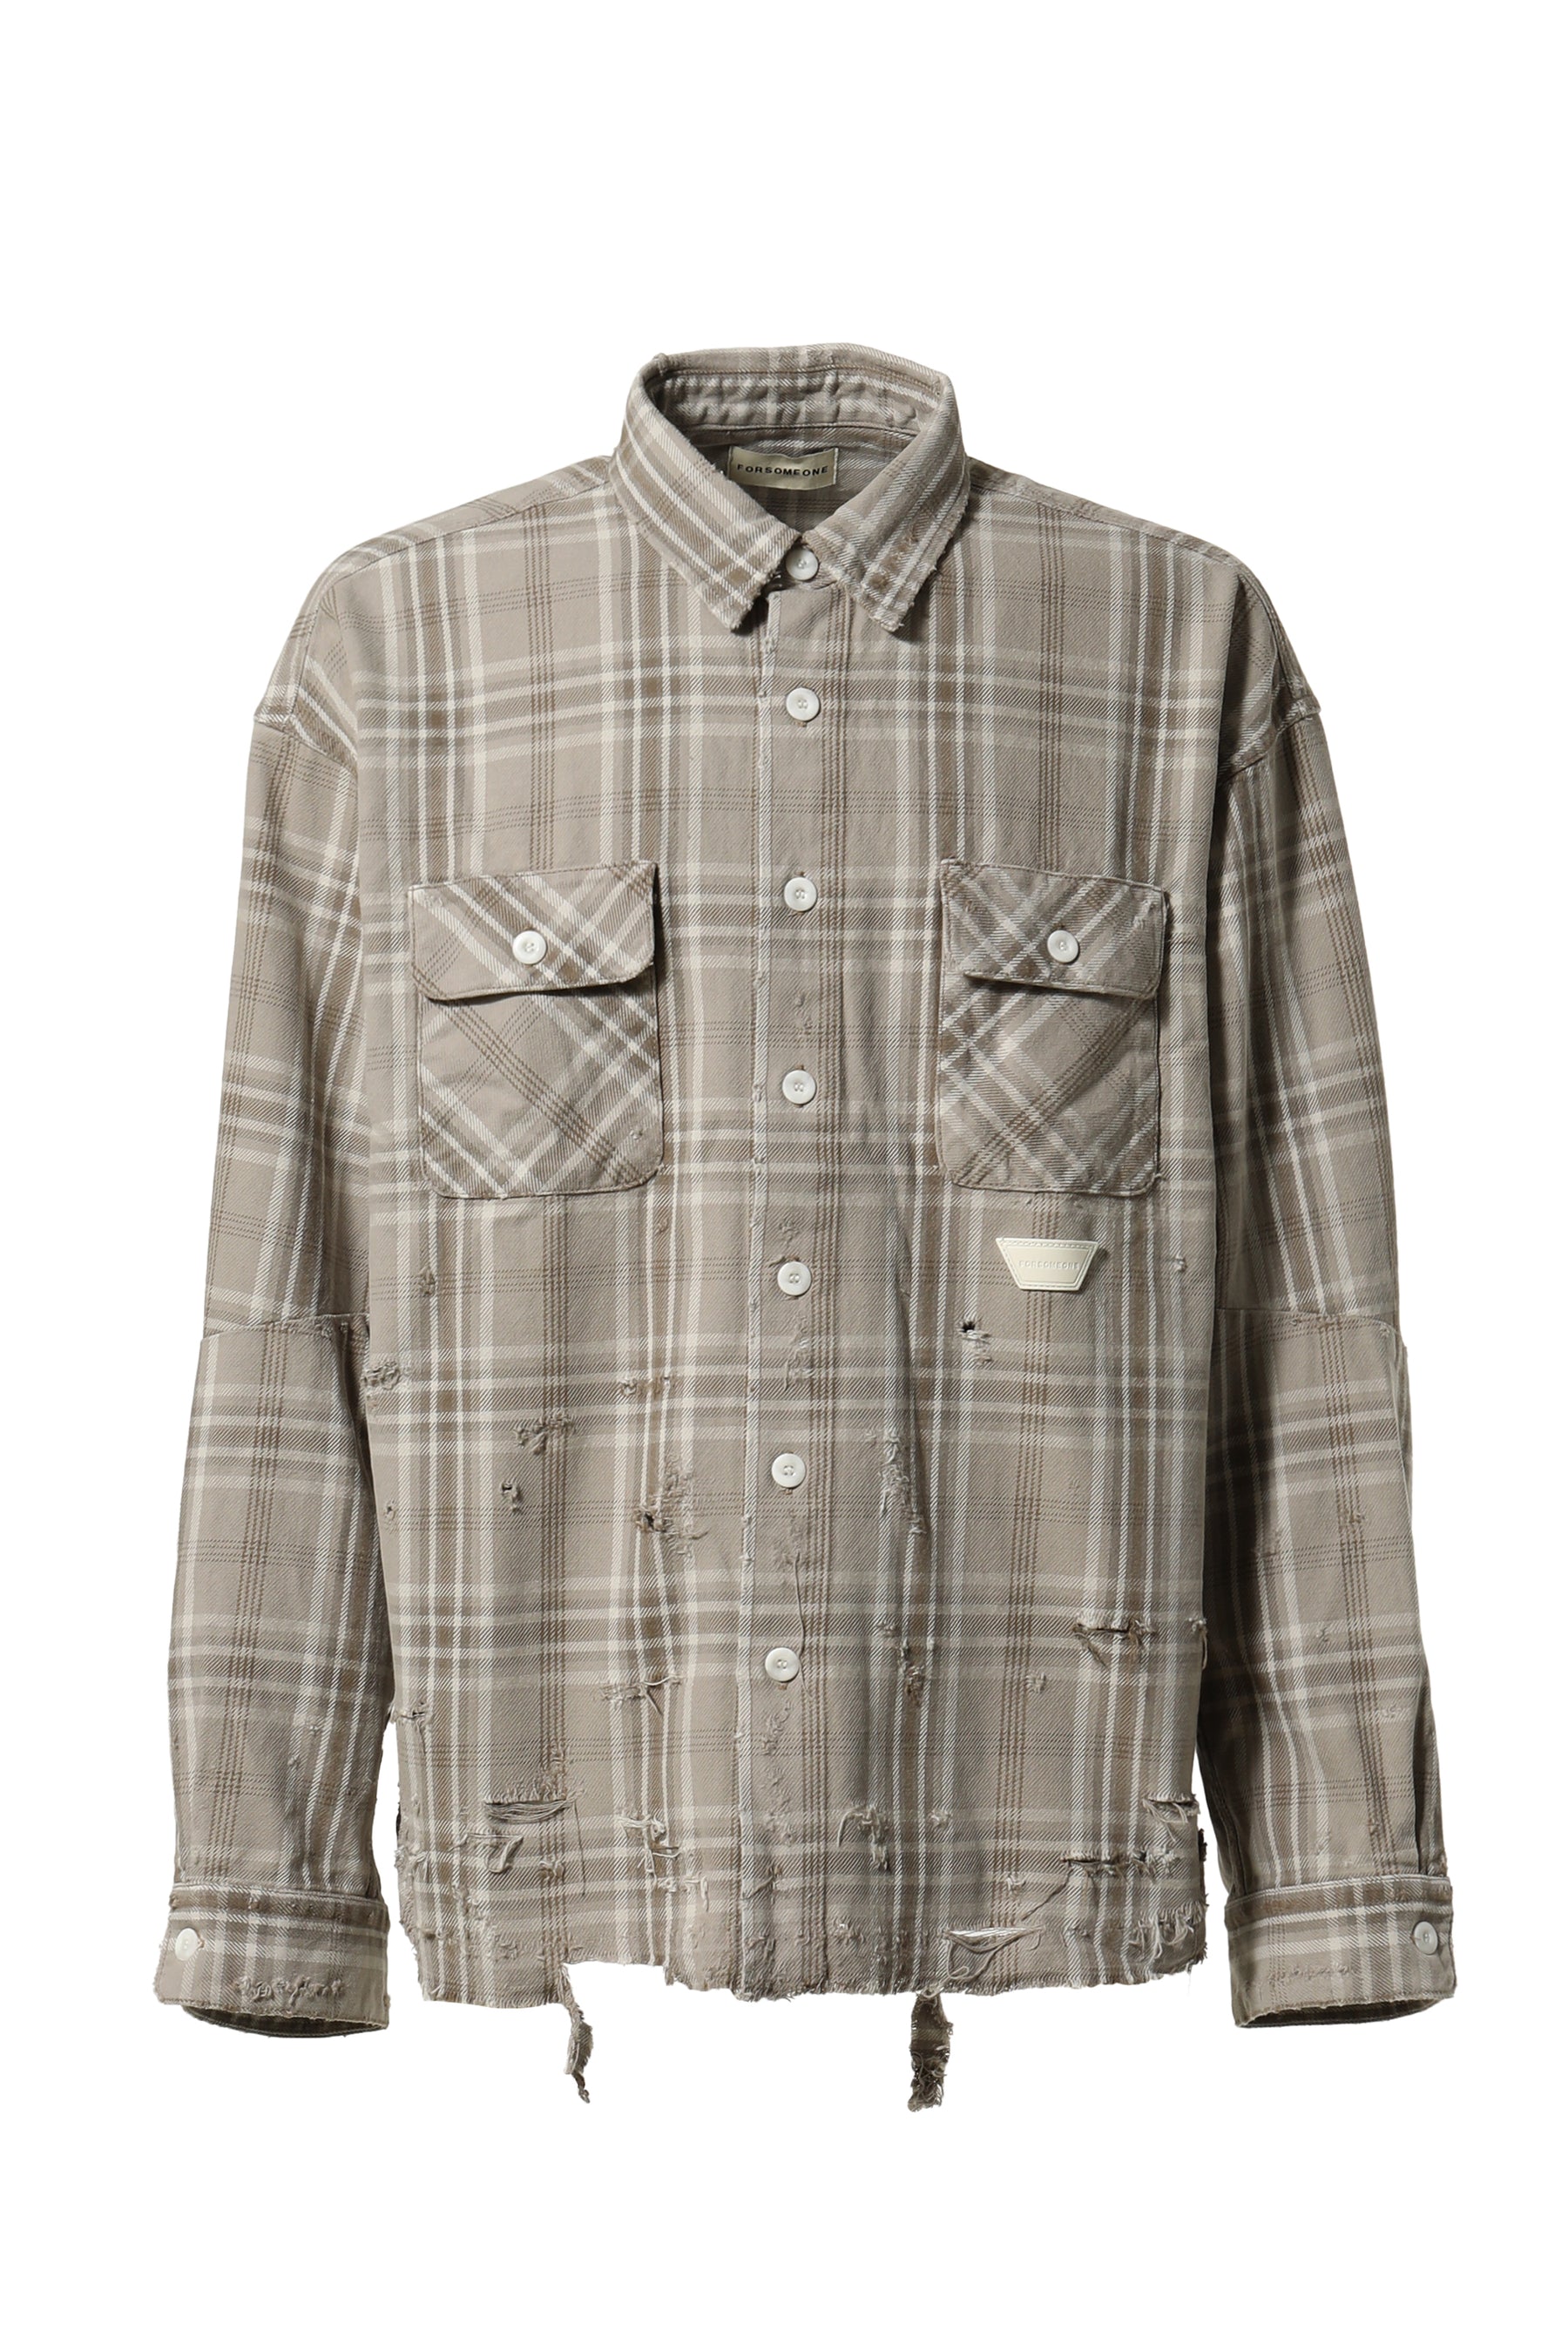 FORSOMEONE フォーサムワン FW23 HEAVY CHECK SHIRT / GRY -NUBIAN